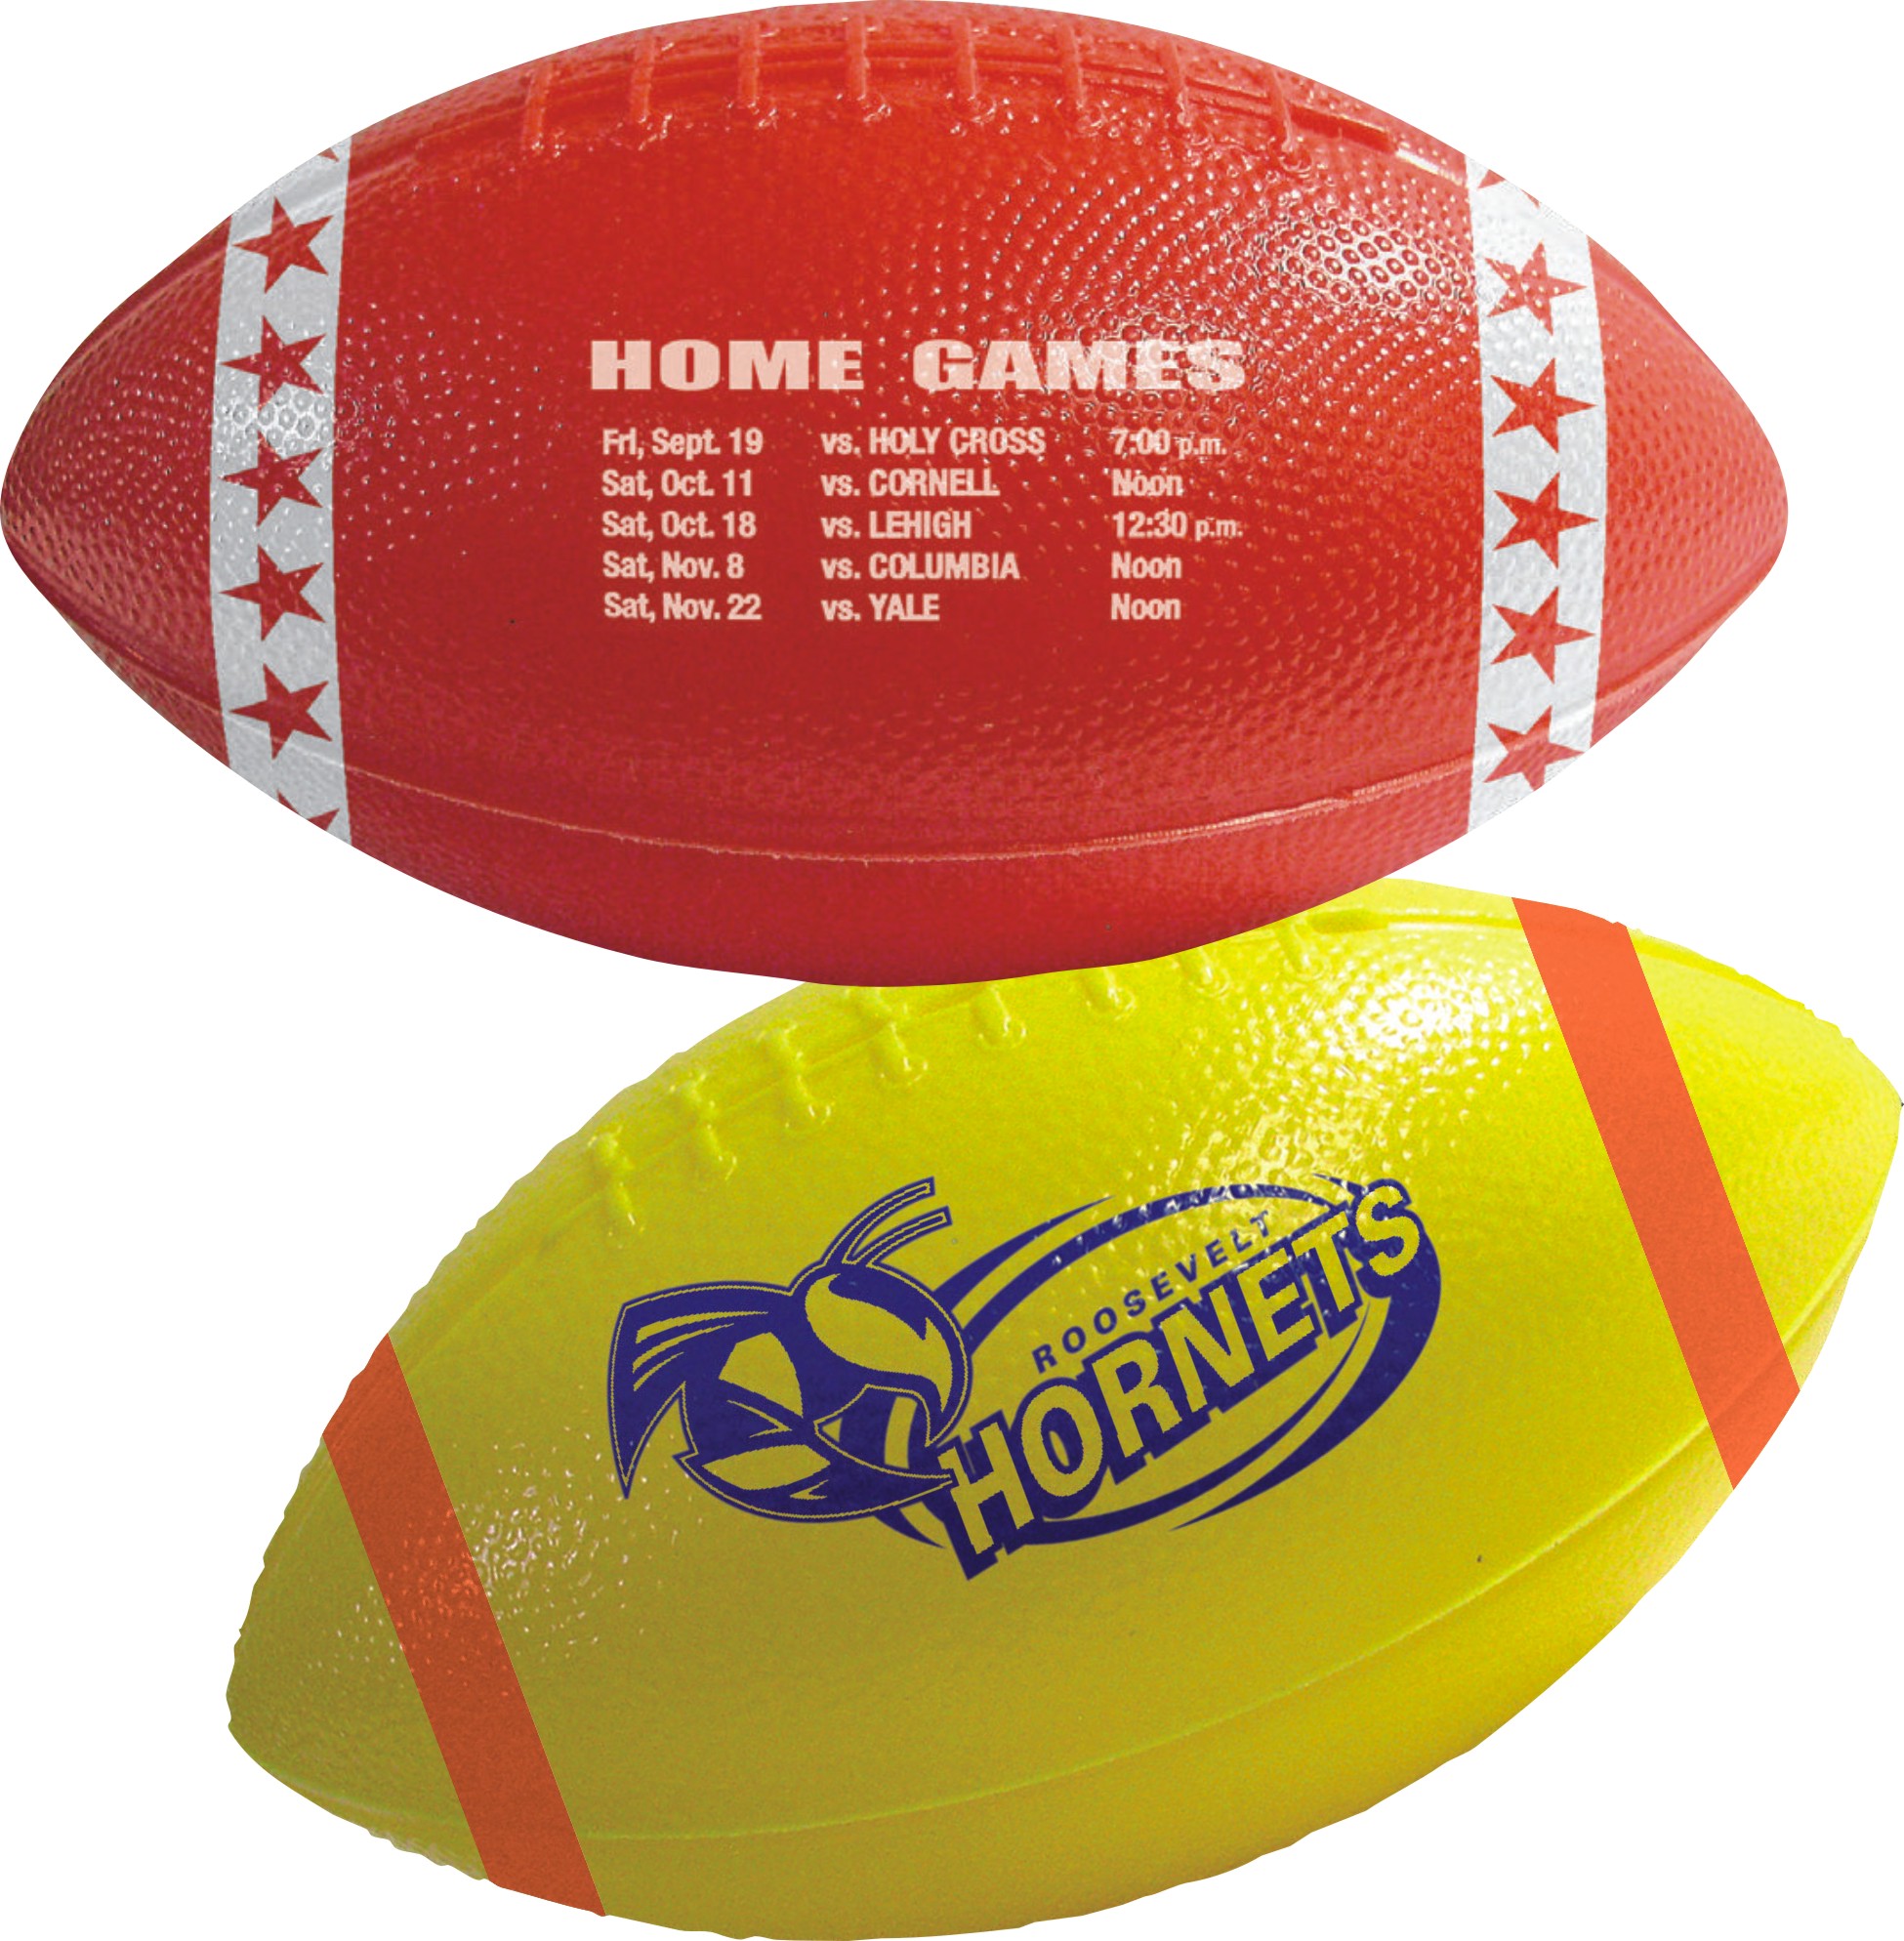 CURRENTLY UNAVAILABLE ................ 6" Mini Plastic Footballs - With Stripes